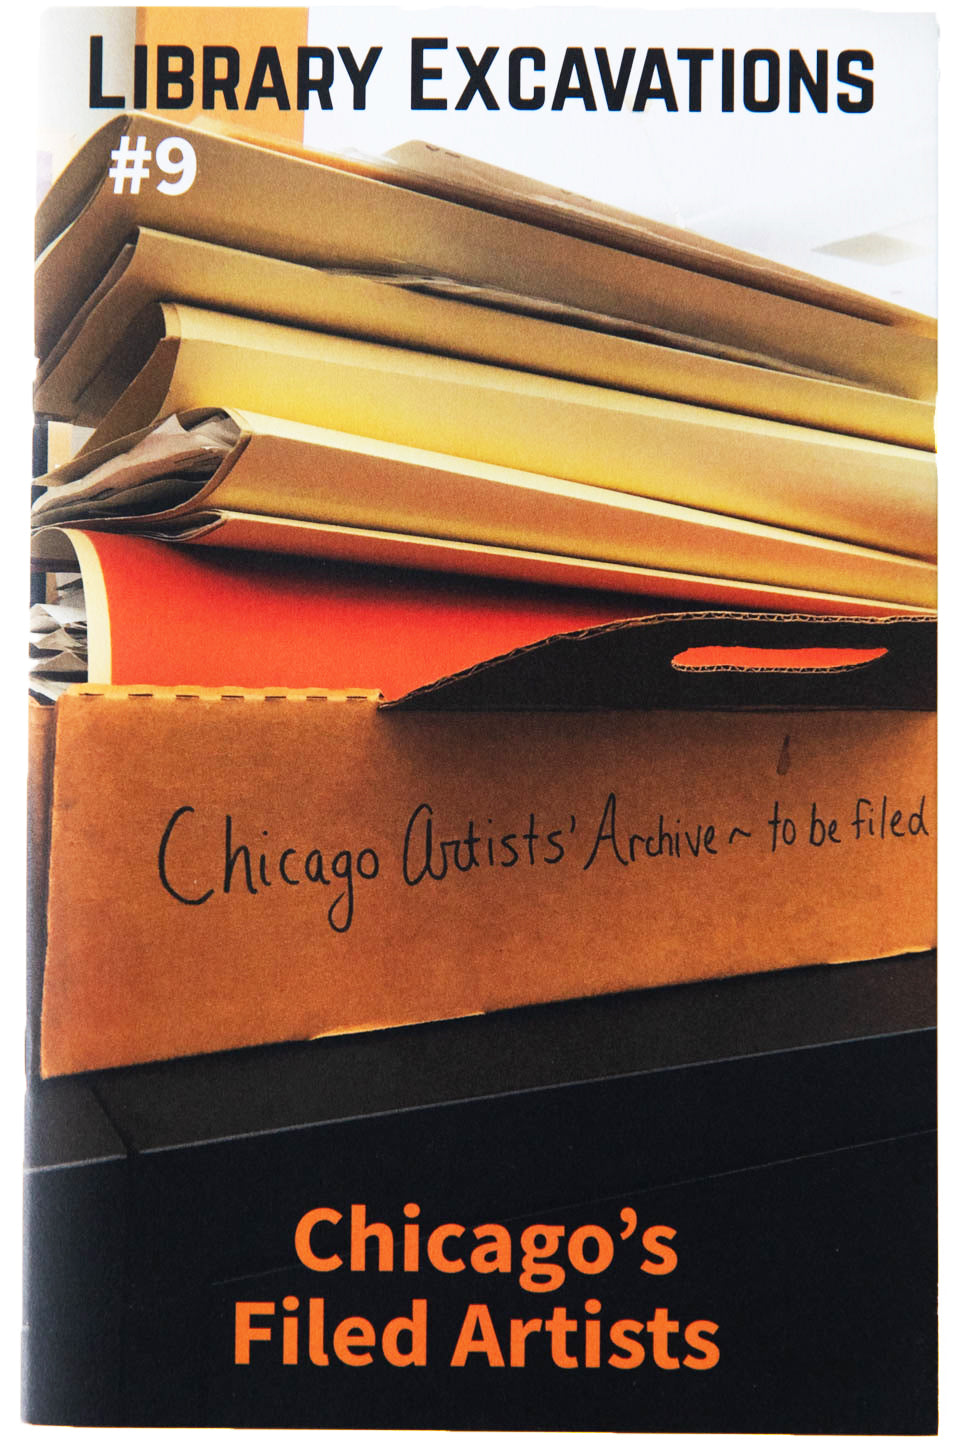 LIBRARY EXCAVATIONS #9 | Chicago's Filed Artists